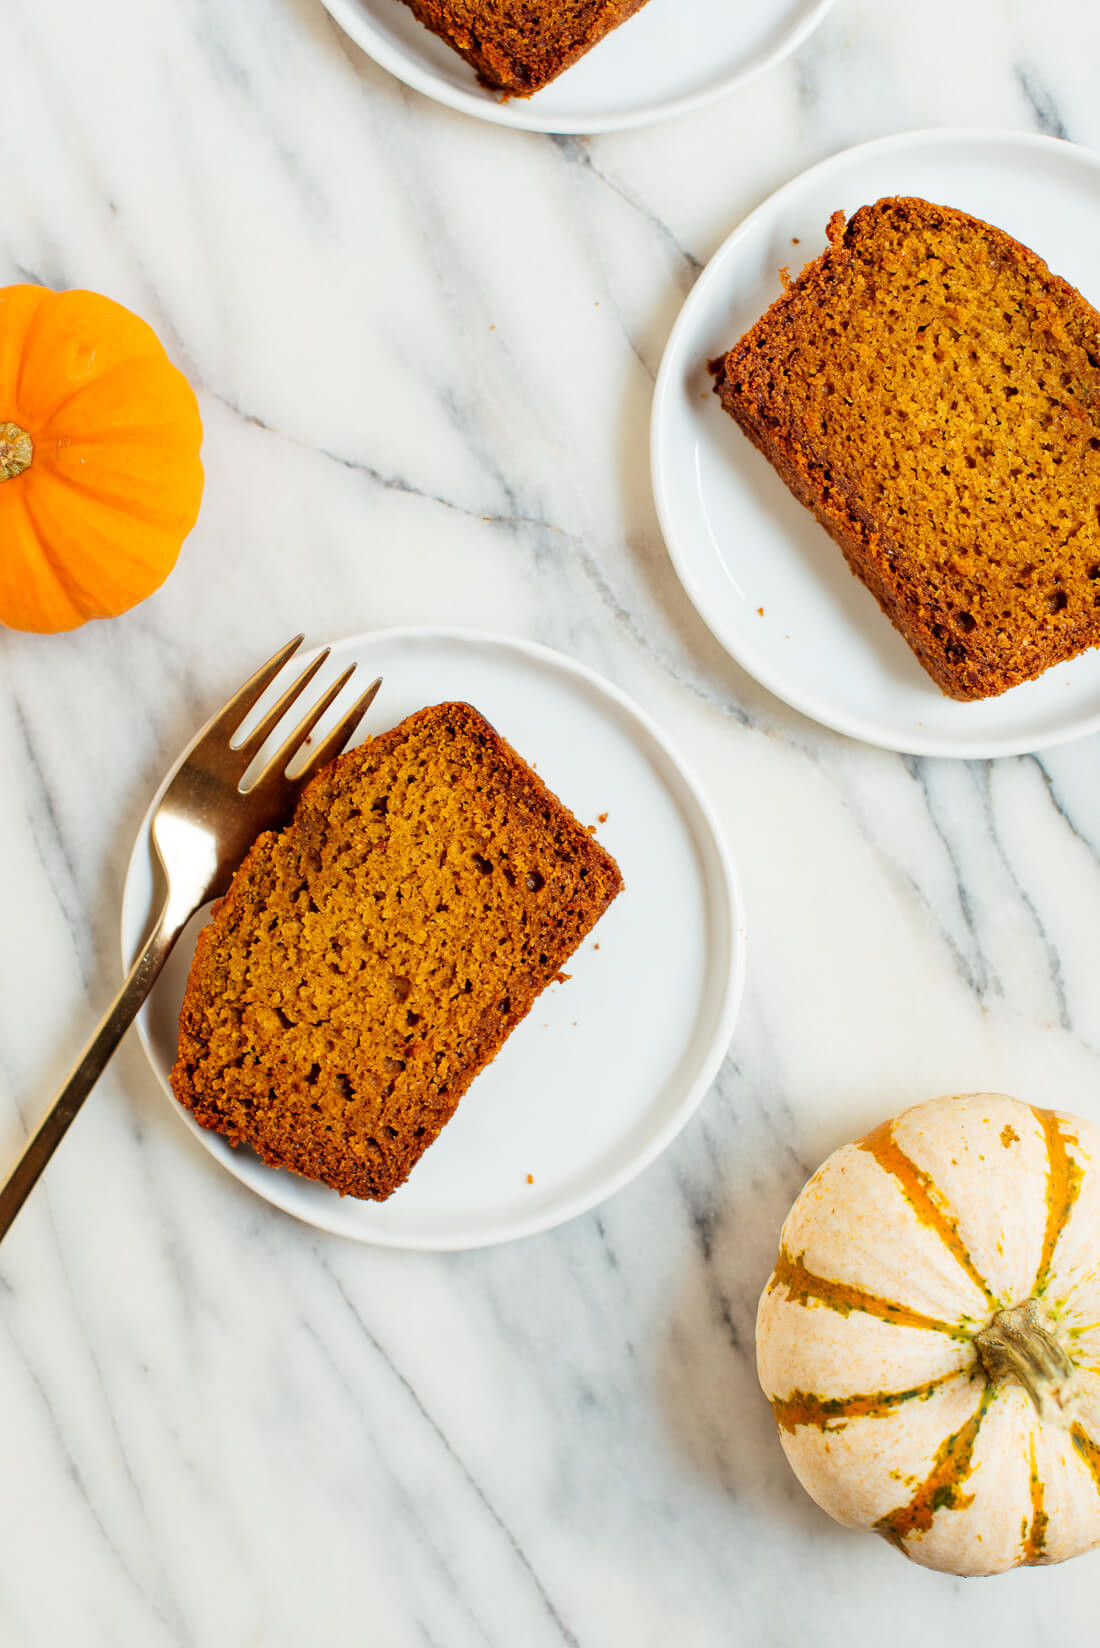 Pumpkin Bread Recipes Healthy the Best Healthy Pumpkin Bread Recipe Cookie and Kate